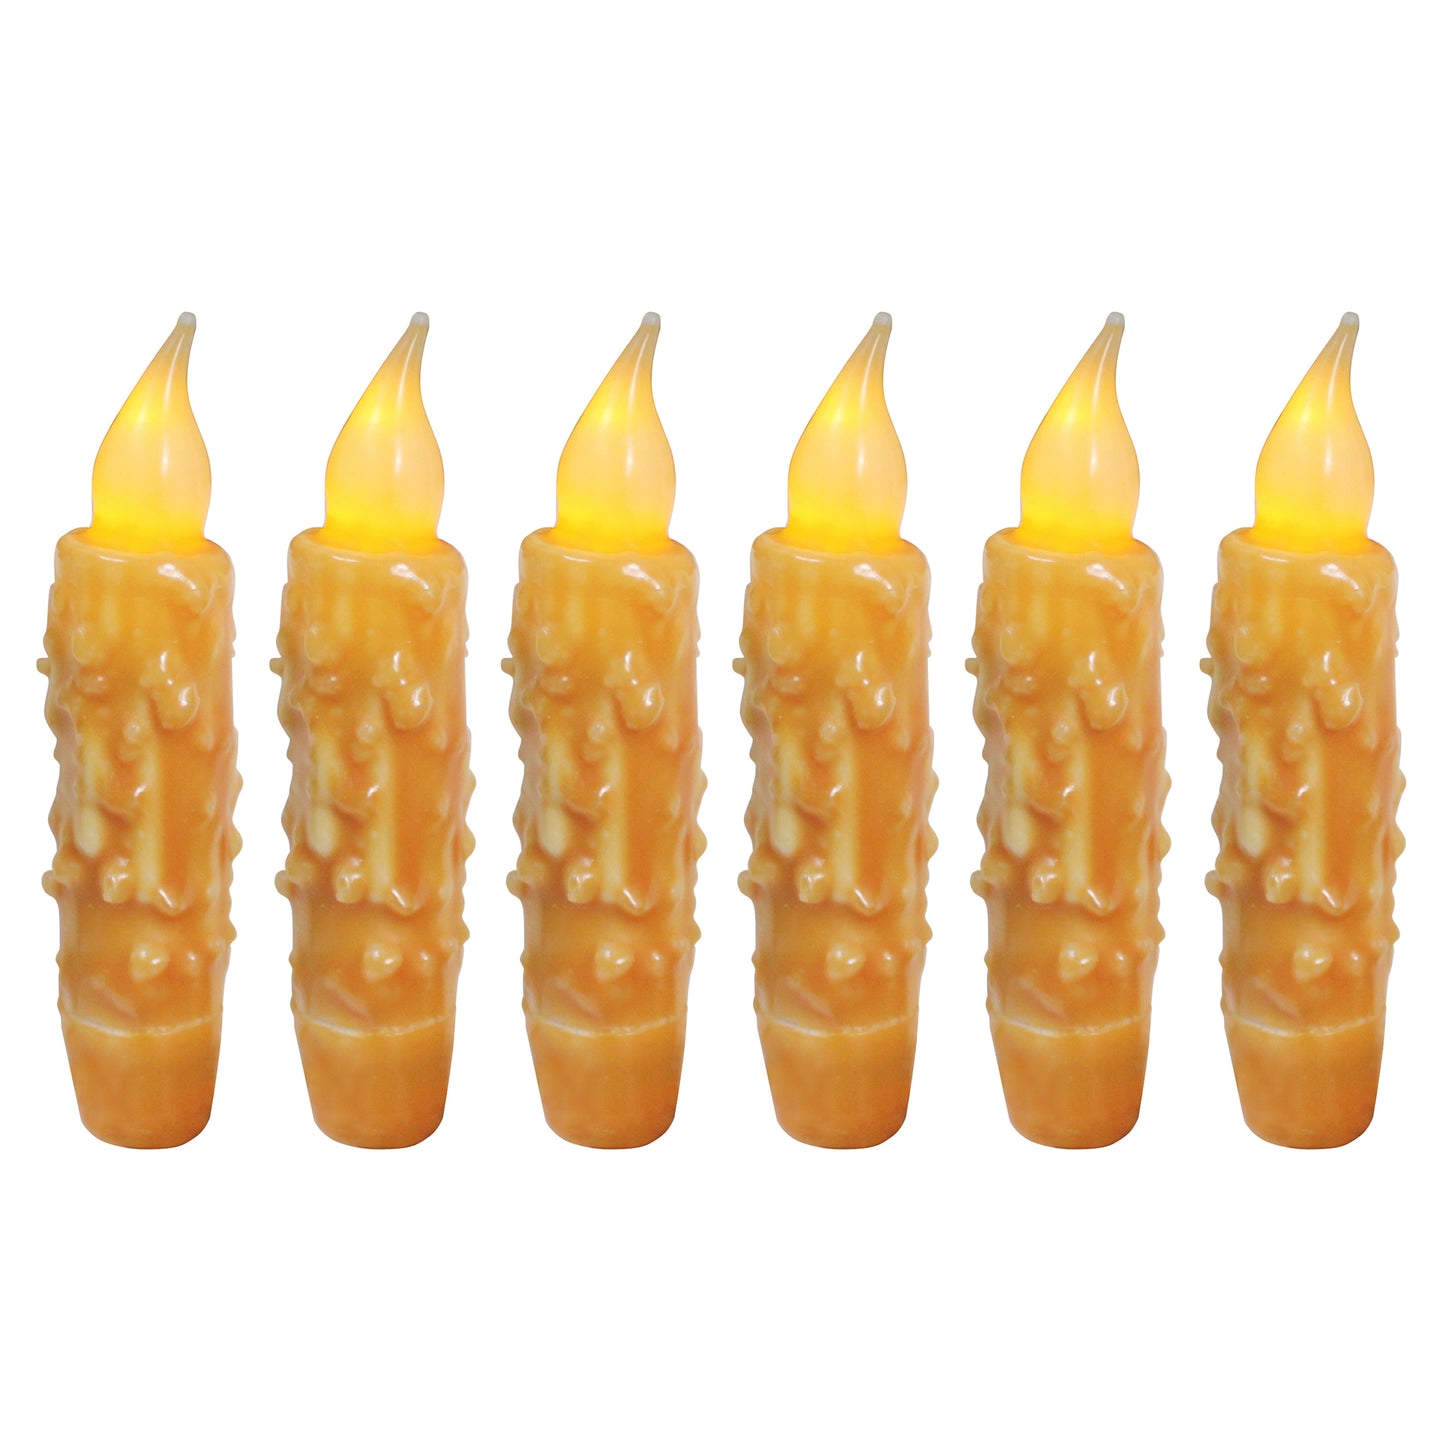 CVHOMEDECO. Real Wax Hand Dipped Battery Operated LED Timer Taper Candles Rustic Primitive Flameless Lights Decor, 4.75 Inch, Orange, 6 PCS in a Package